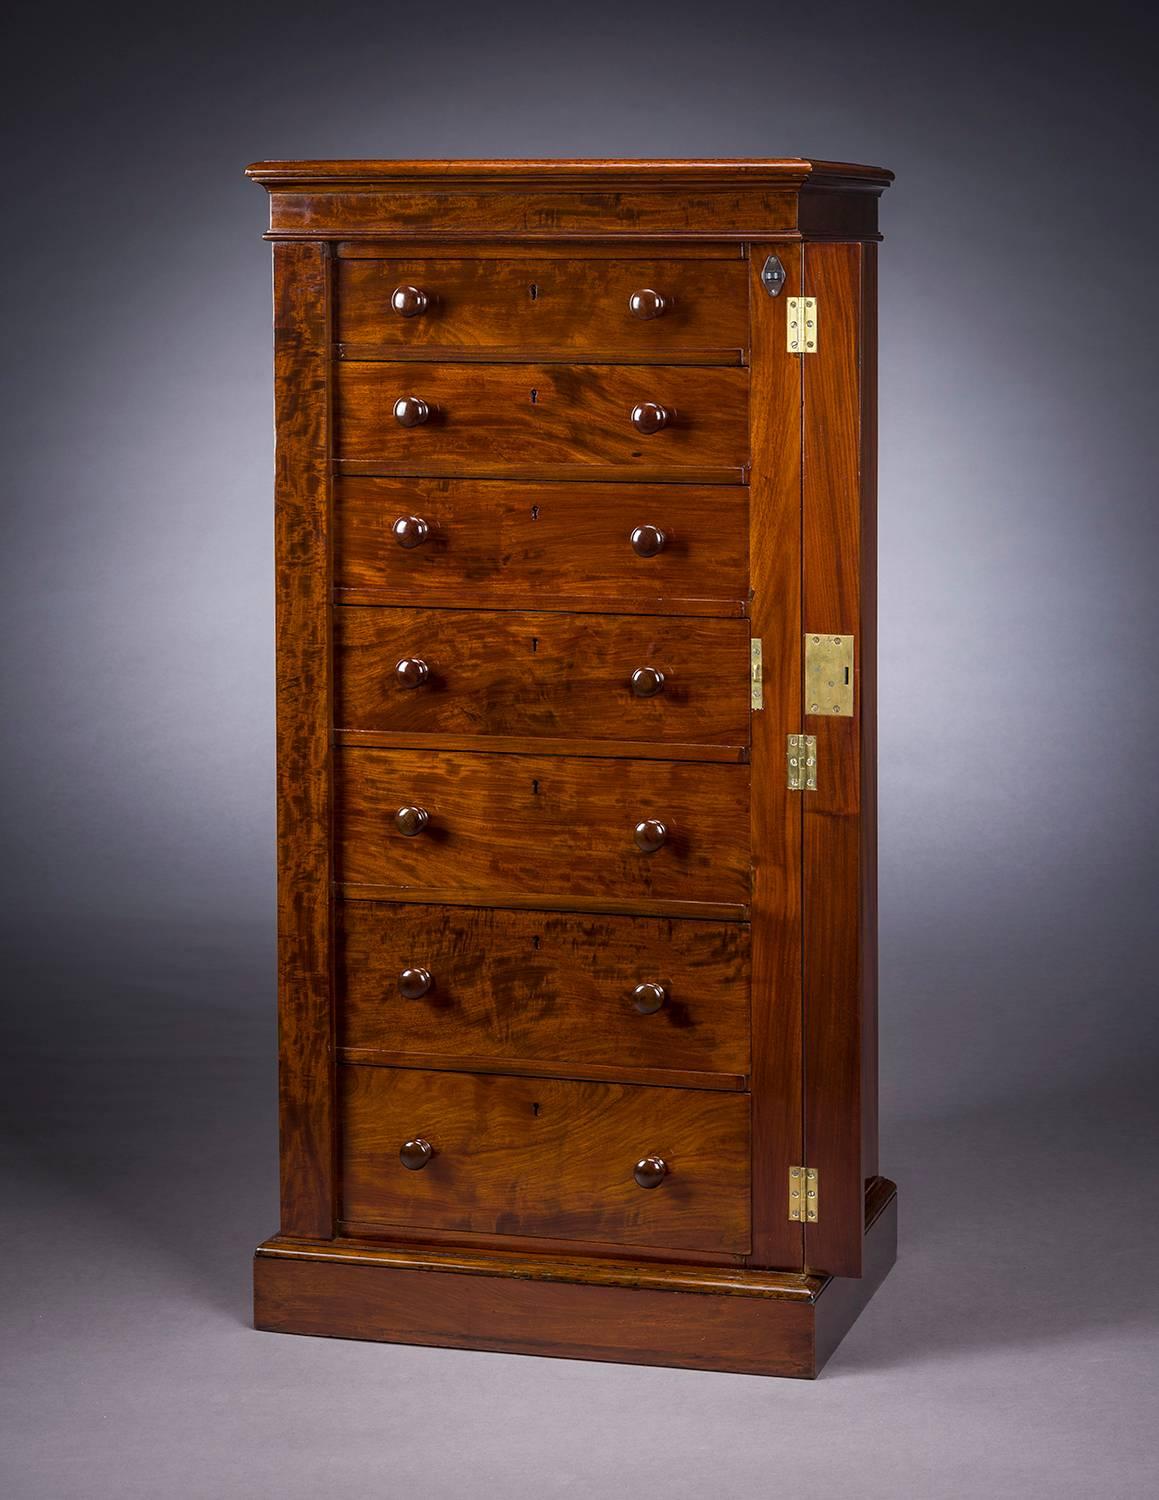 Boston, Massachusetts
Seven-drawer tall chest, circa 1825.
Mahogany (secondary woods: mahogany, pine, and poplar)
Measures: 45 5/8 in. high, 27 5/8 in. wide, 14 5/8 in. deep 
Inscribed (on six drawer locks): SECURE; (on seventh lock): CHUBB’S /